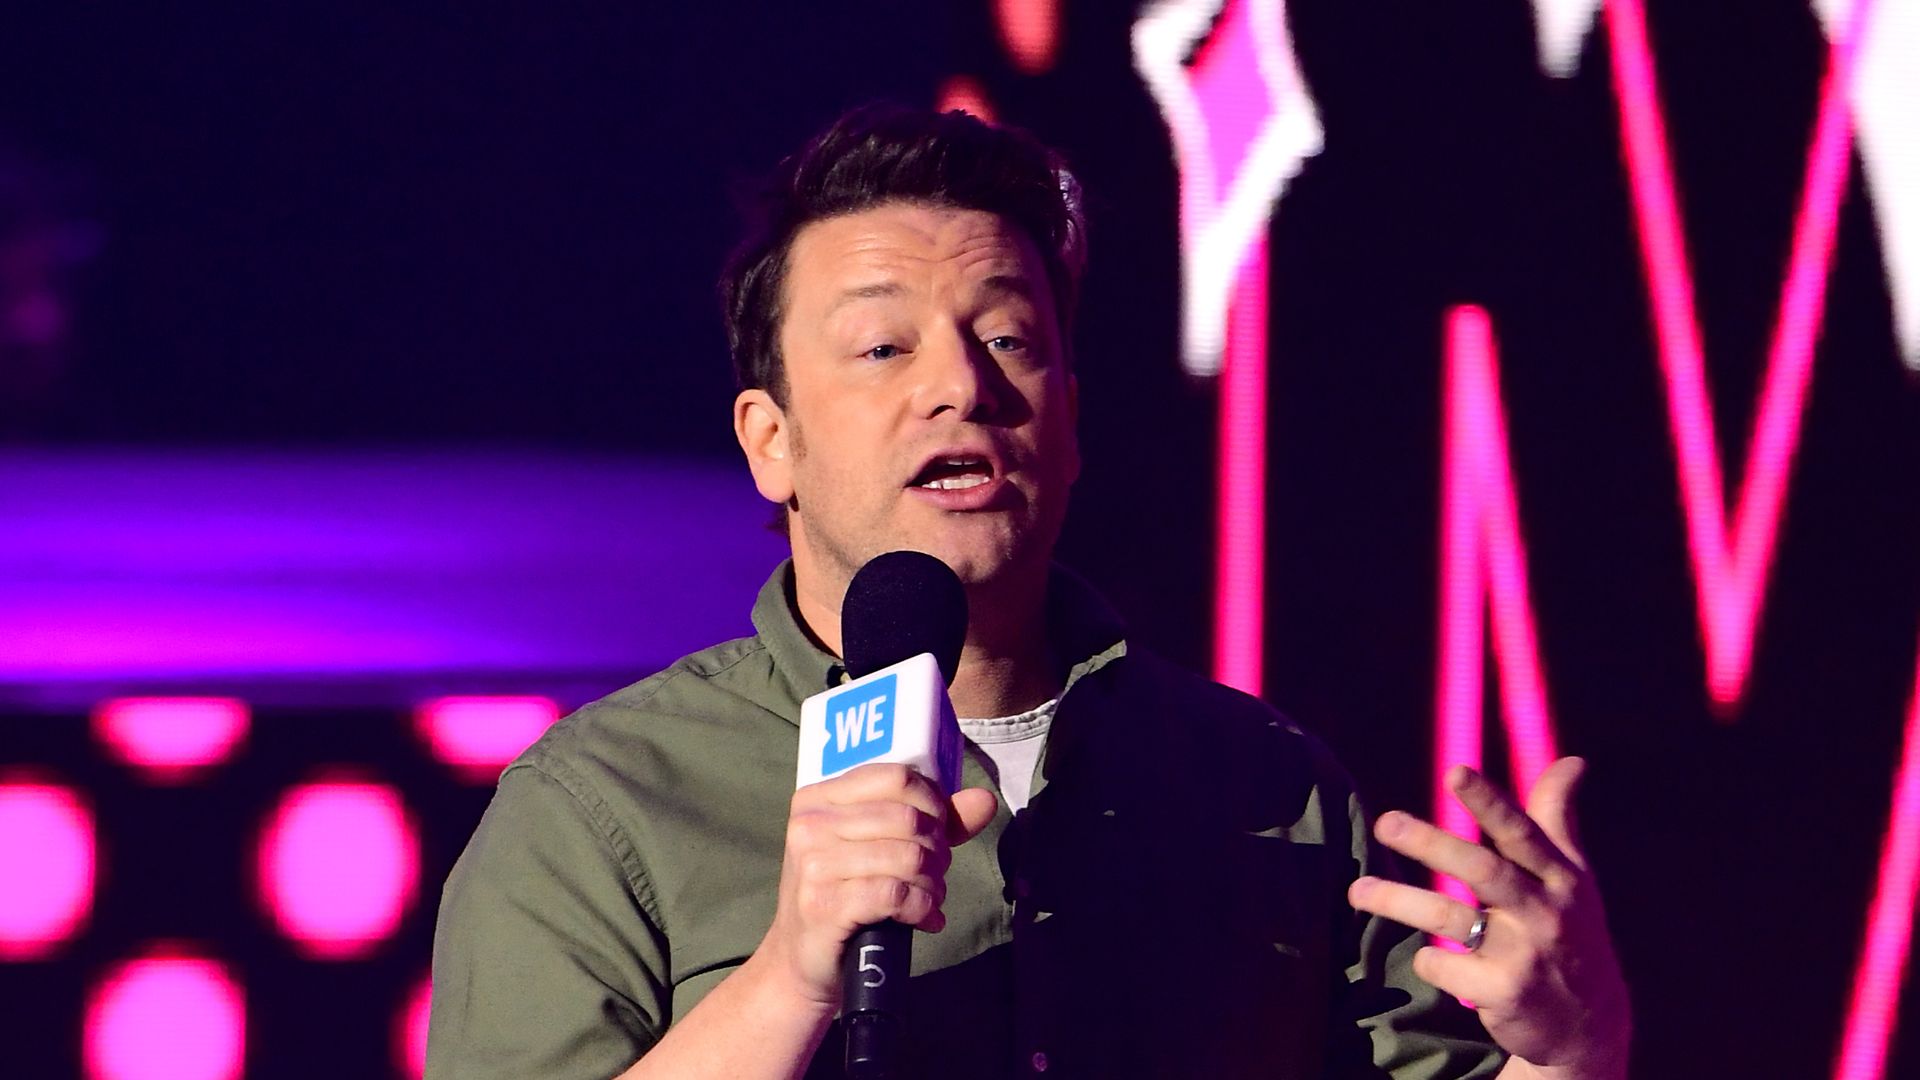 Jamie Oliver on stage at the WE Day UK charity event and concert held at The SSE Arena, Arena Square, London. - Credit: PA